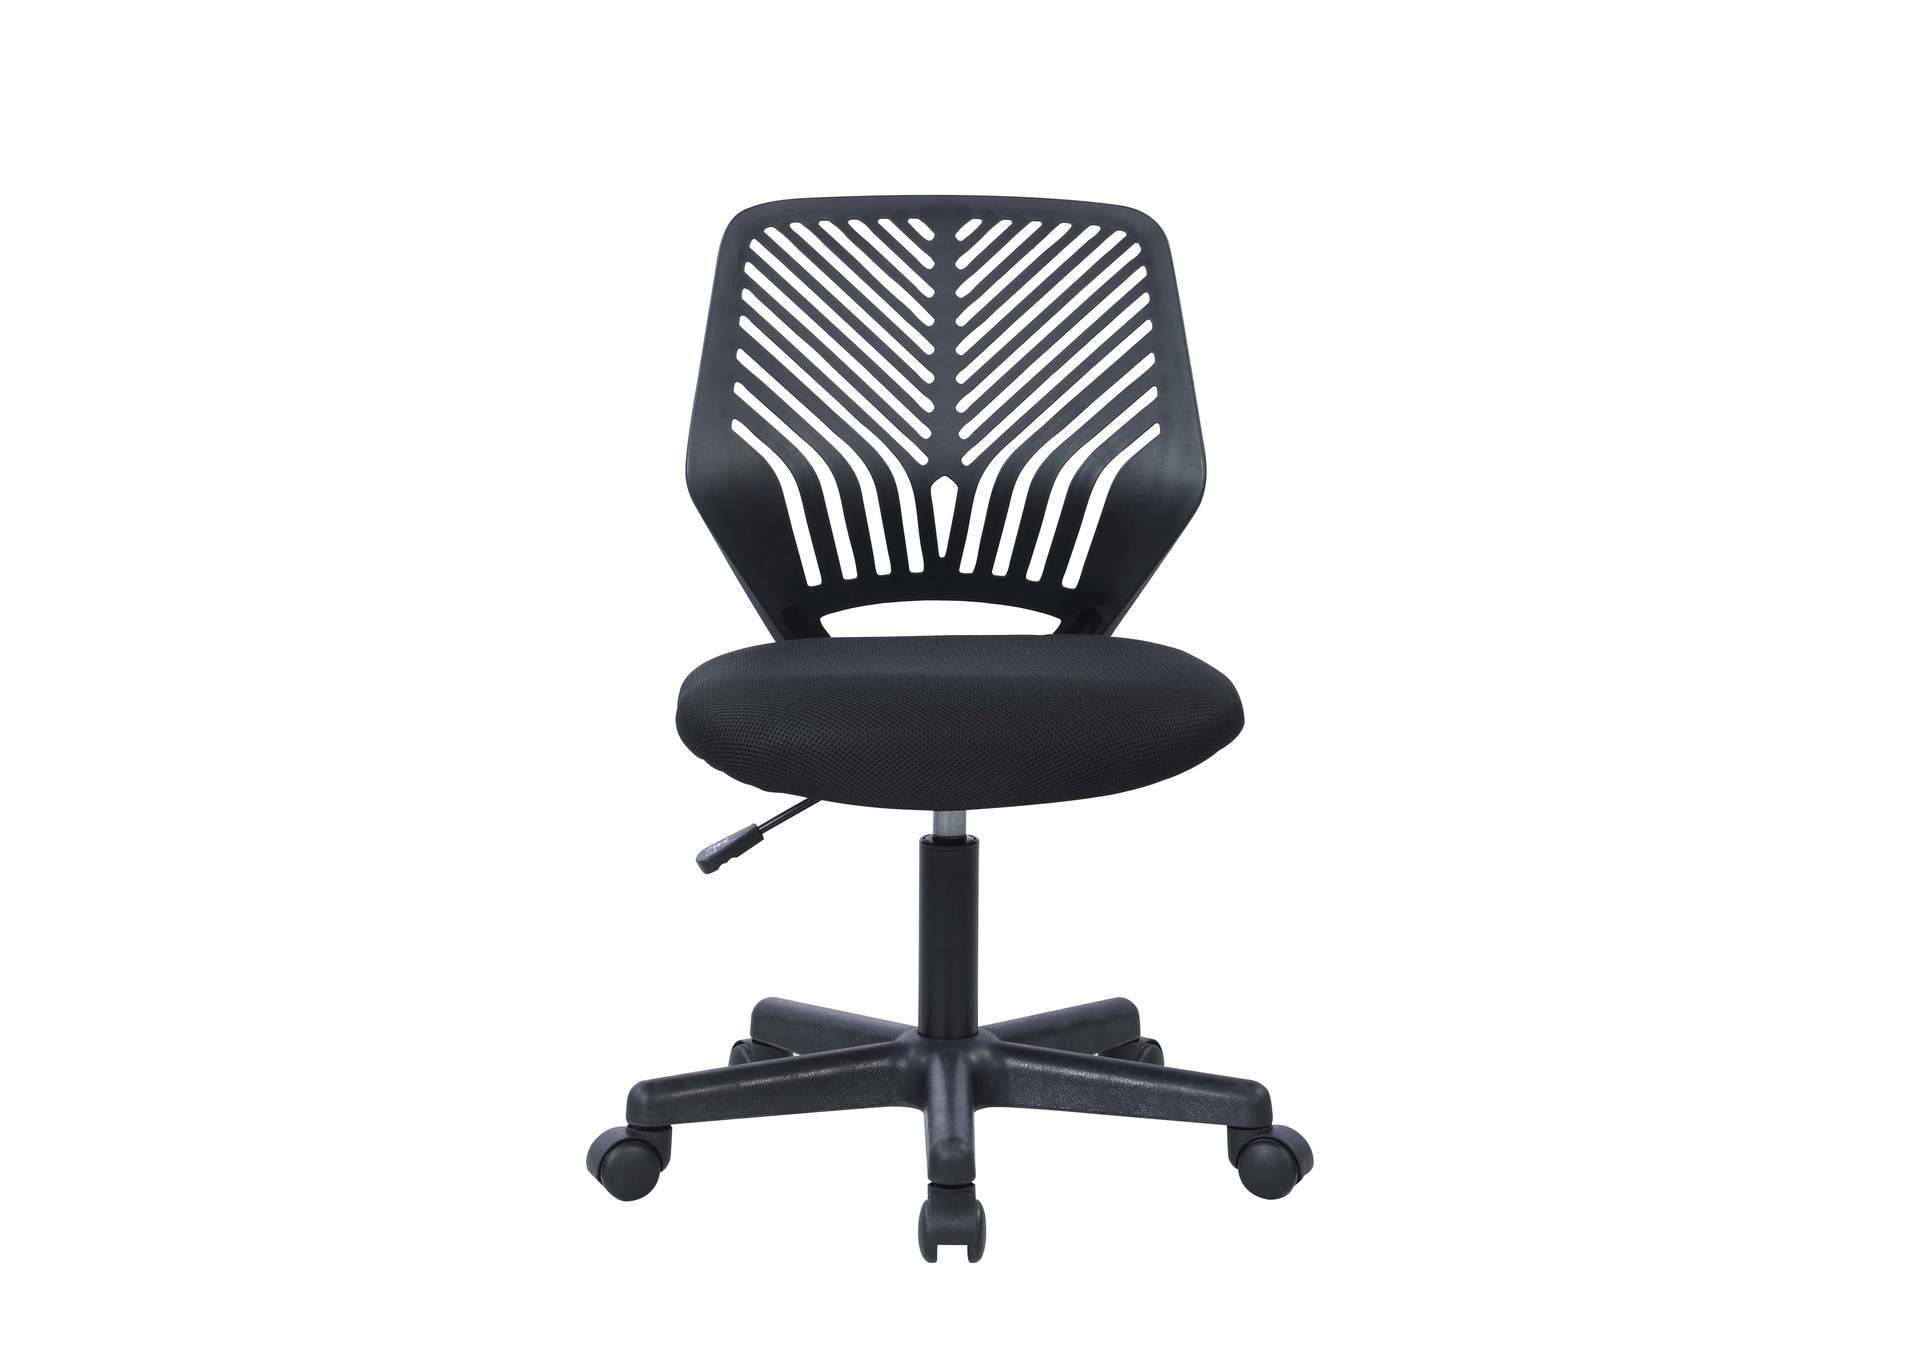 Modern Pneumatic Adjustable-Height Computer Chair,Chintaly Imports